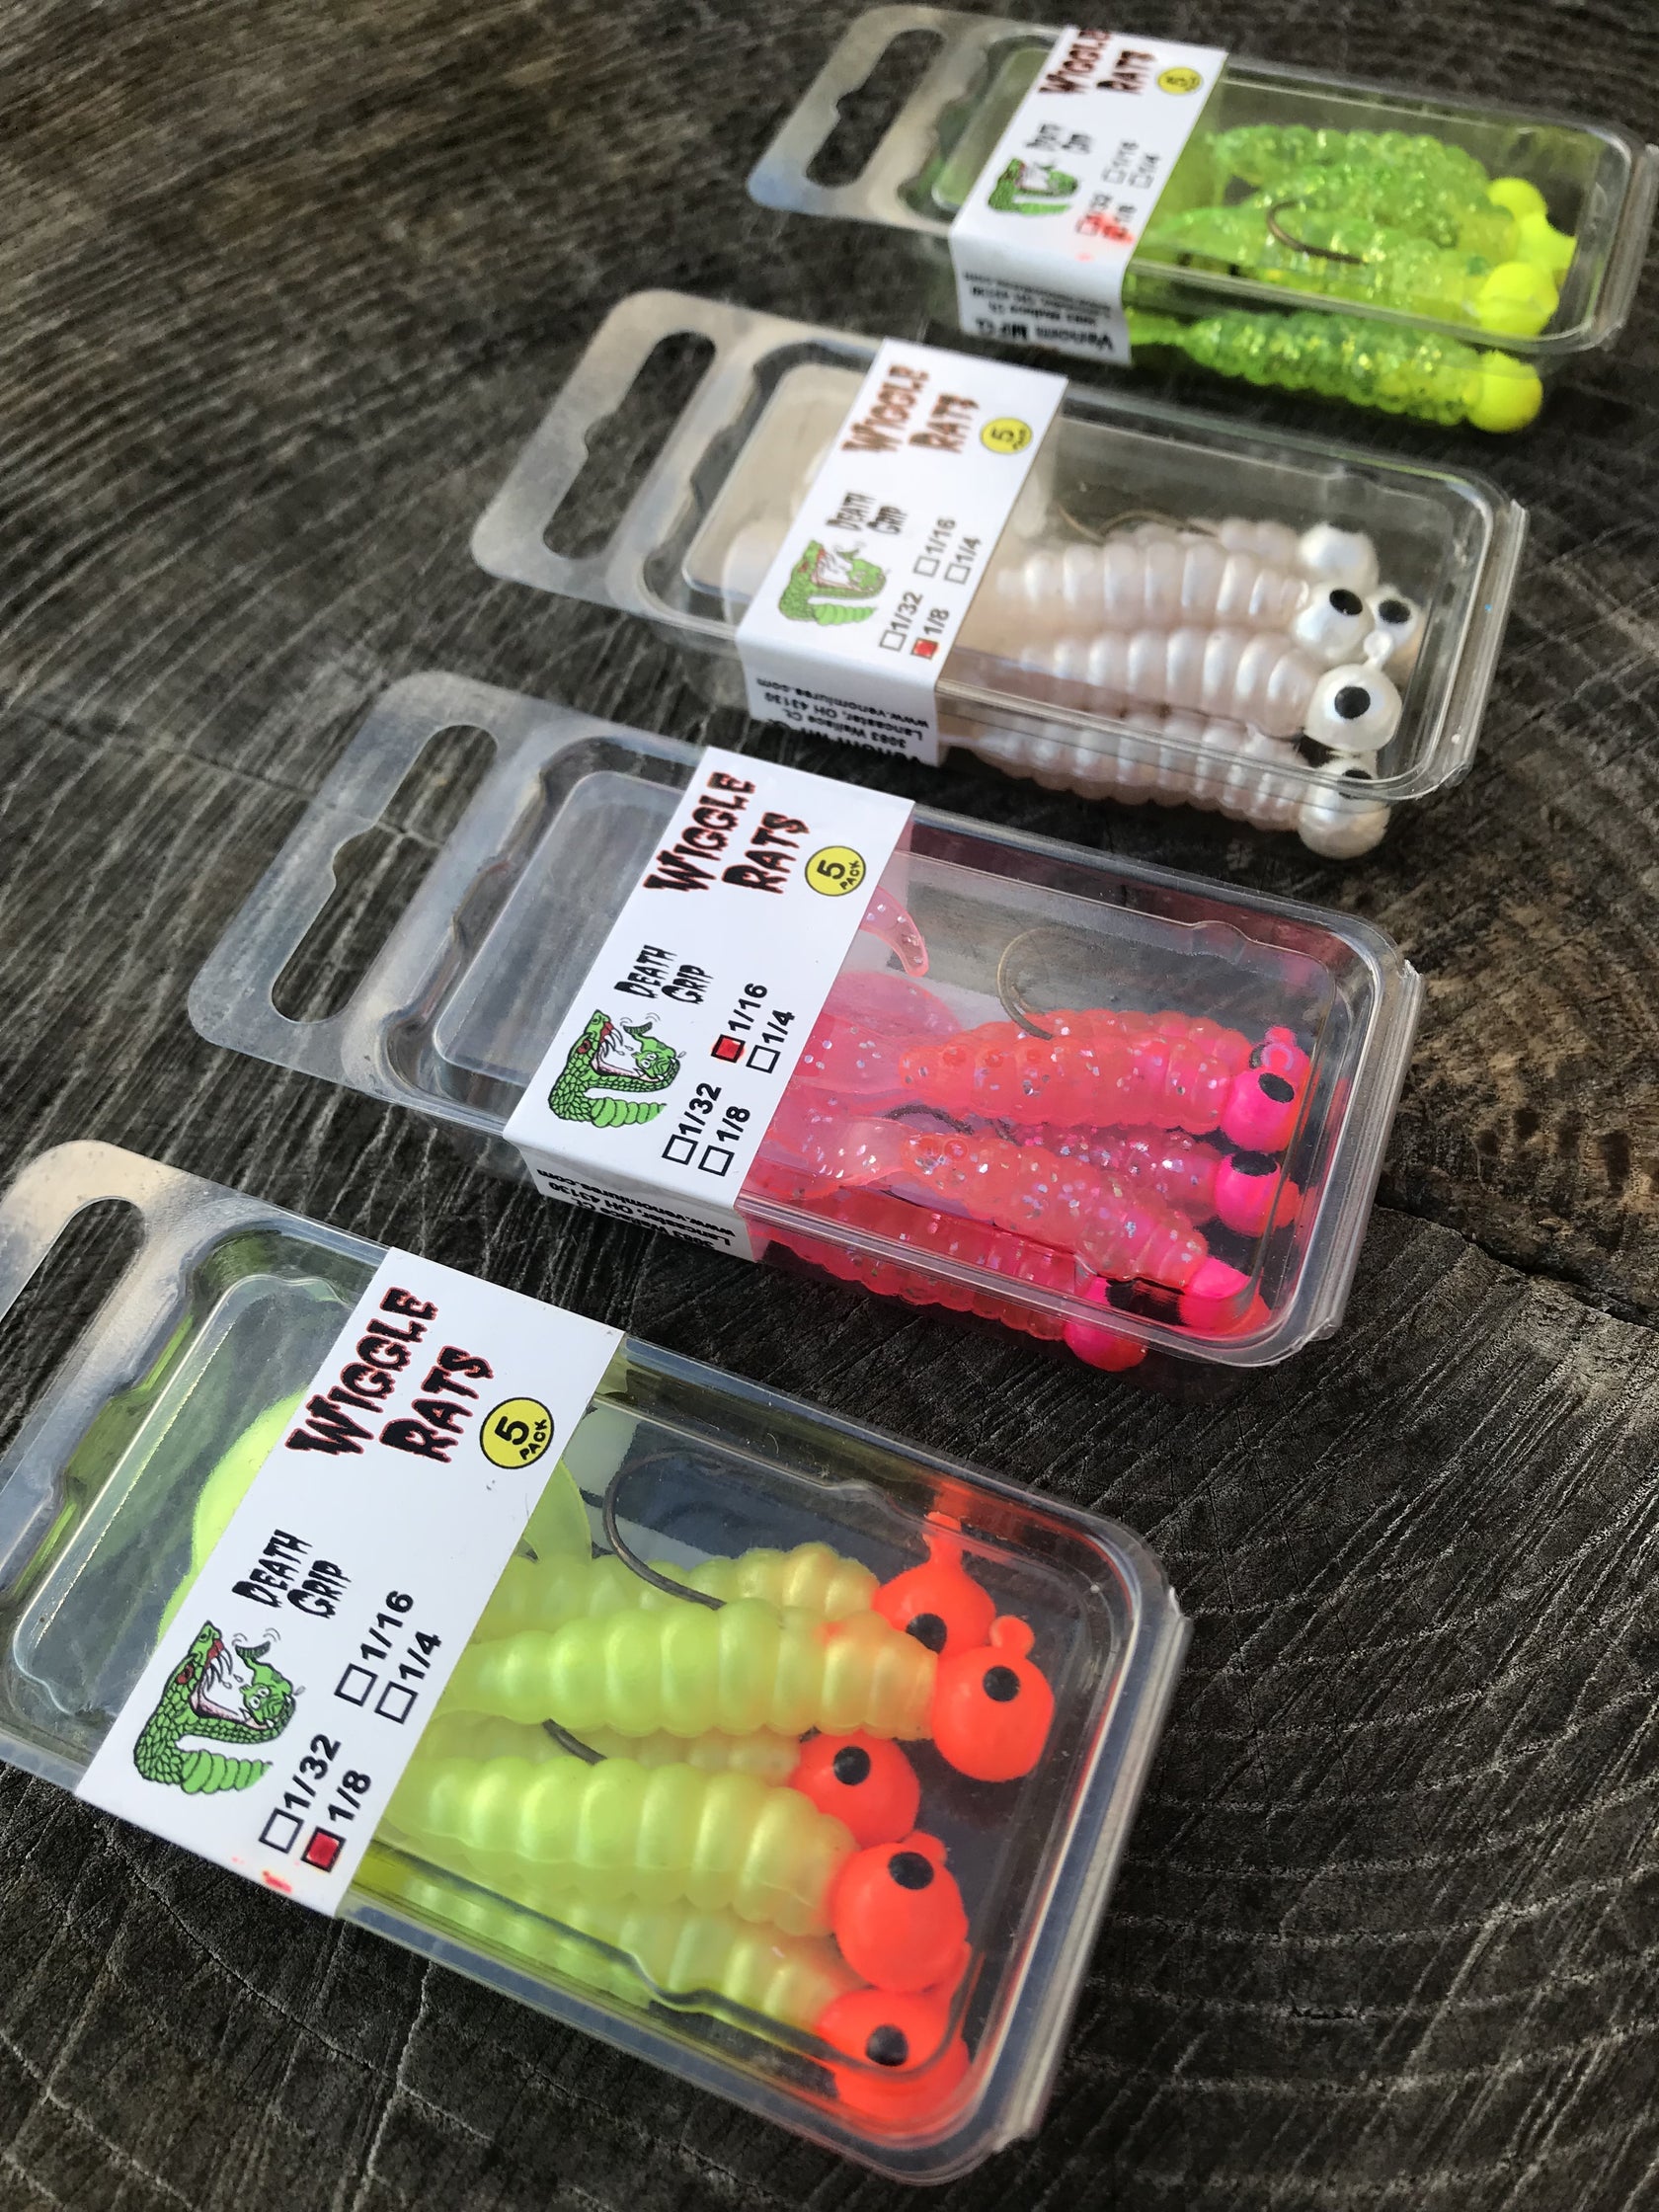 Wiggle Rats - Fishing Lures – Venom Lures